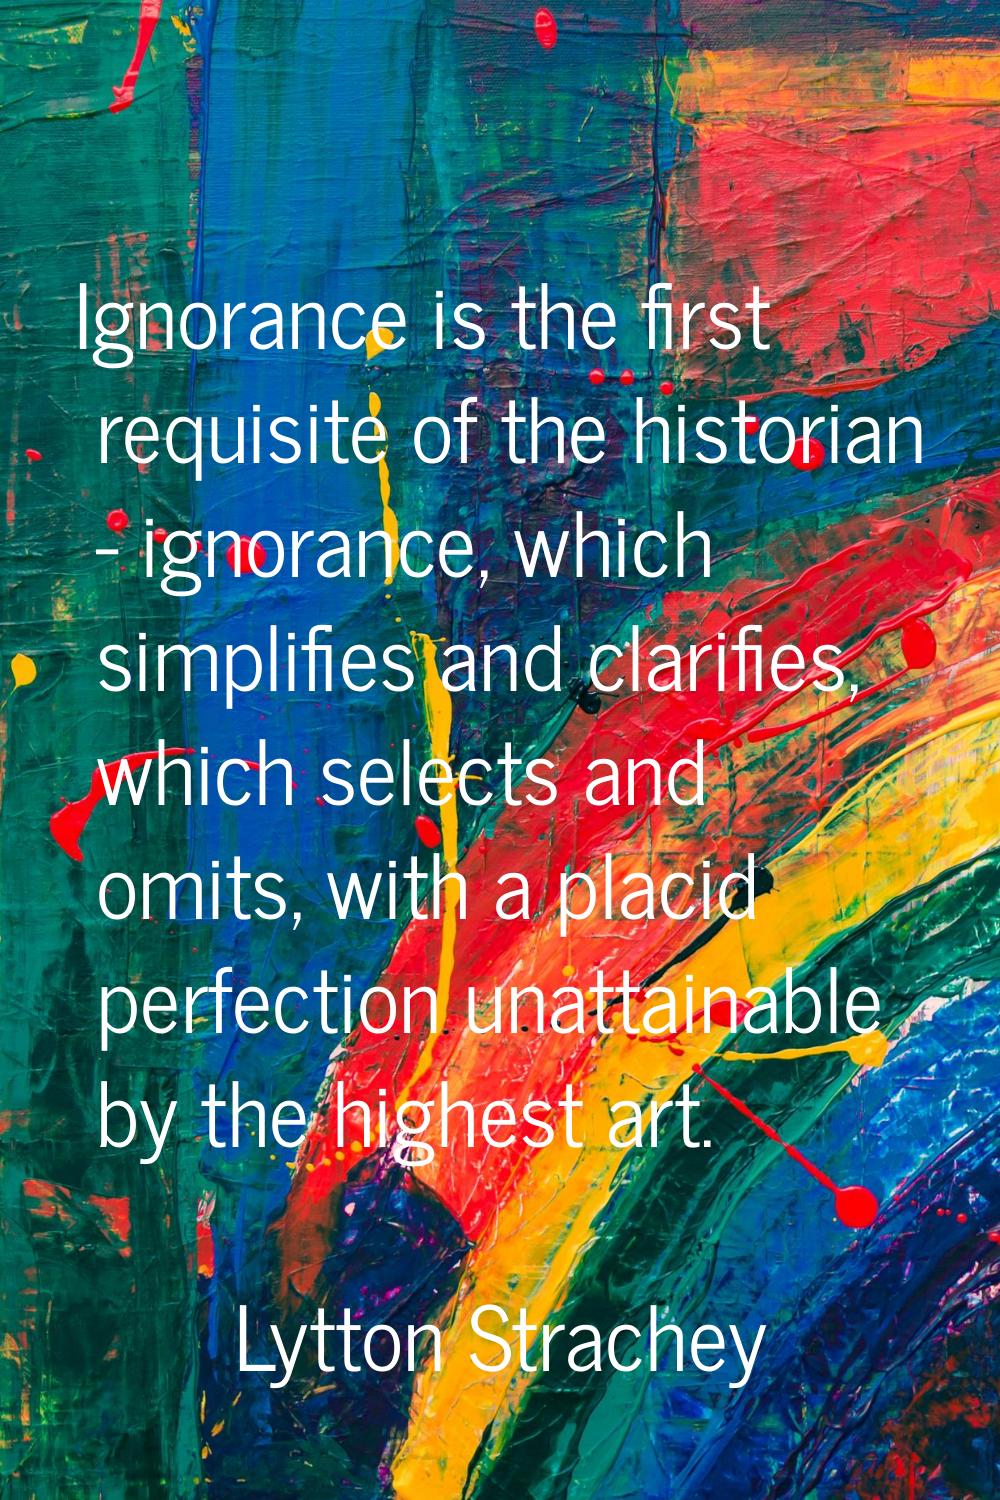 Ignorance is the first requisite of the historian - ignorance, which simplifies and clarifies, whic